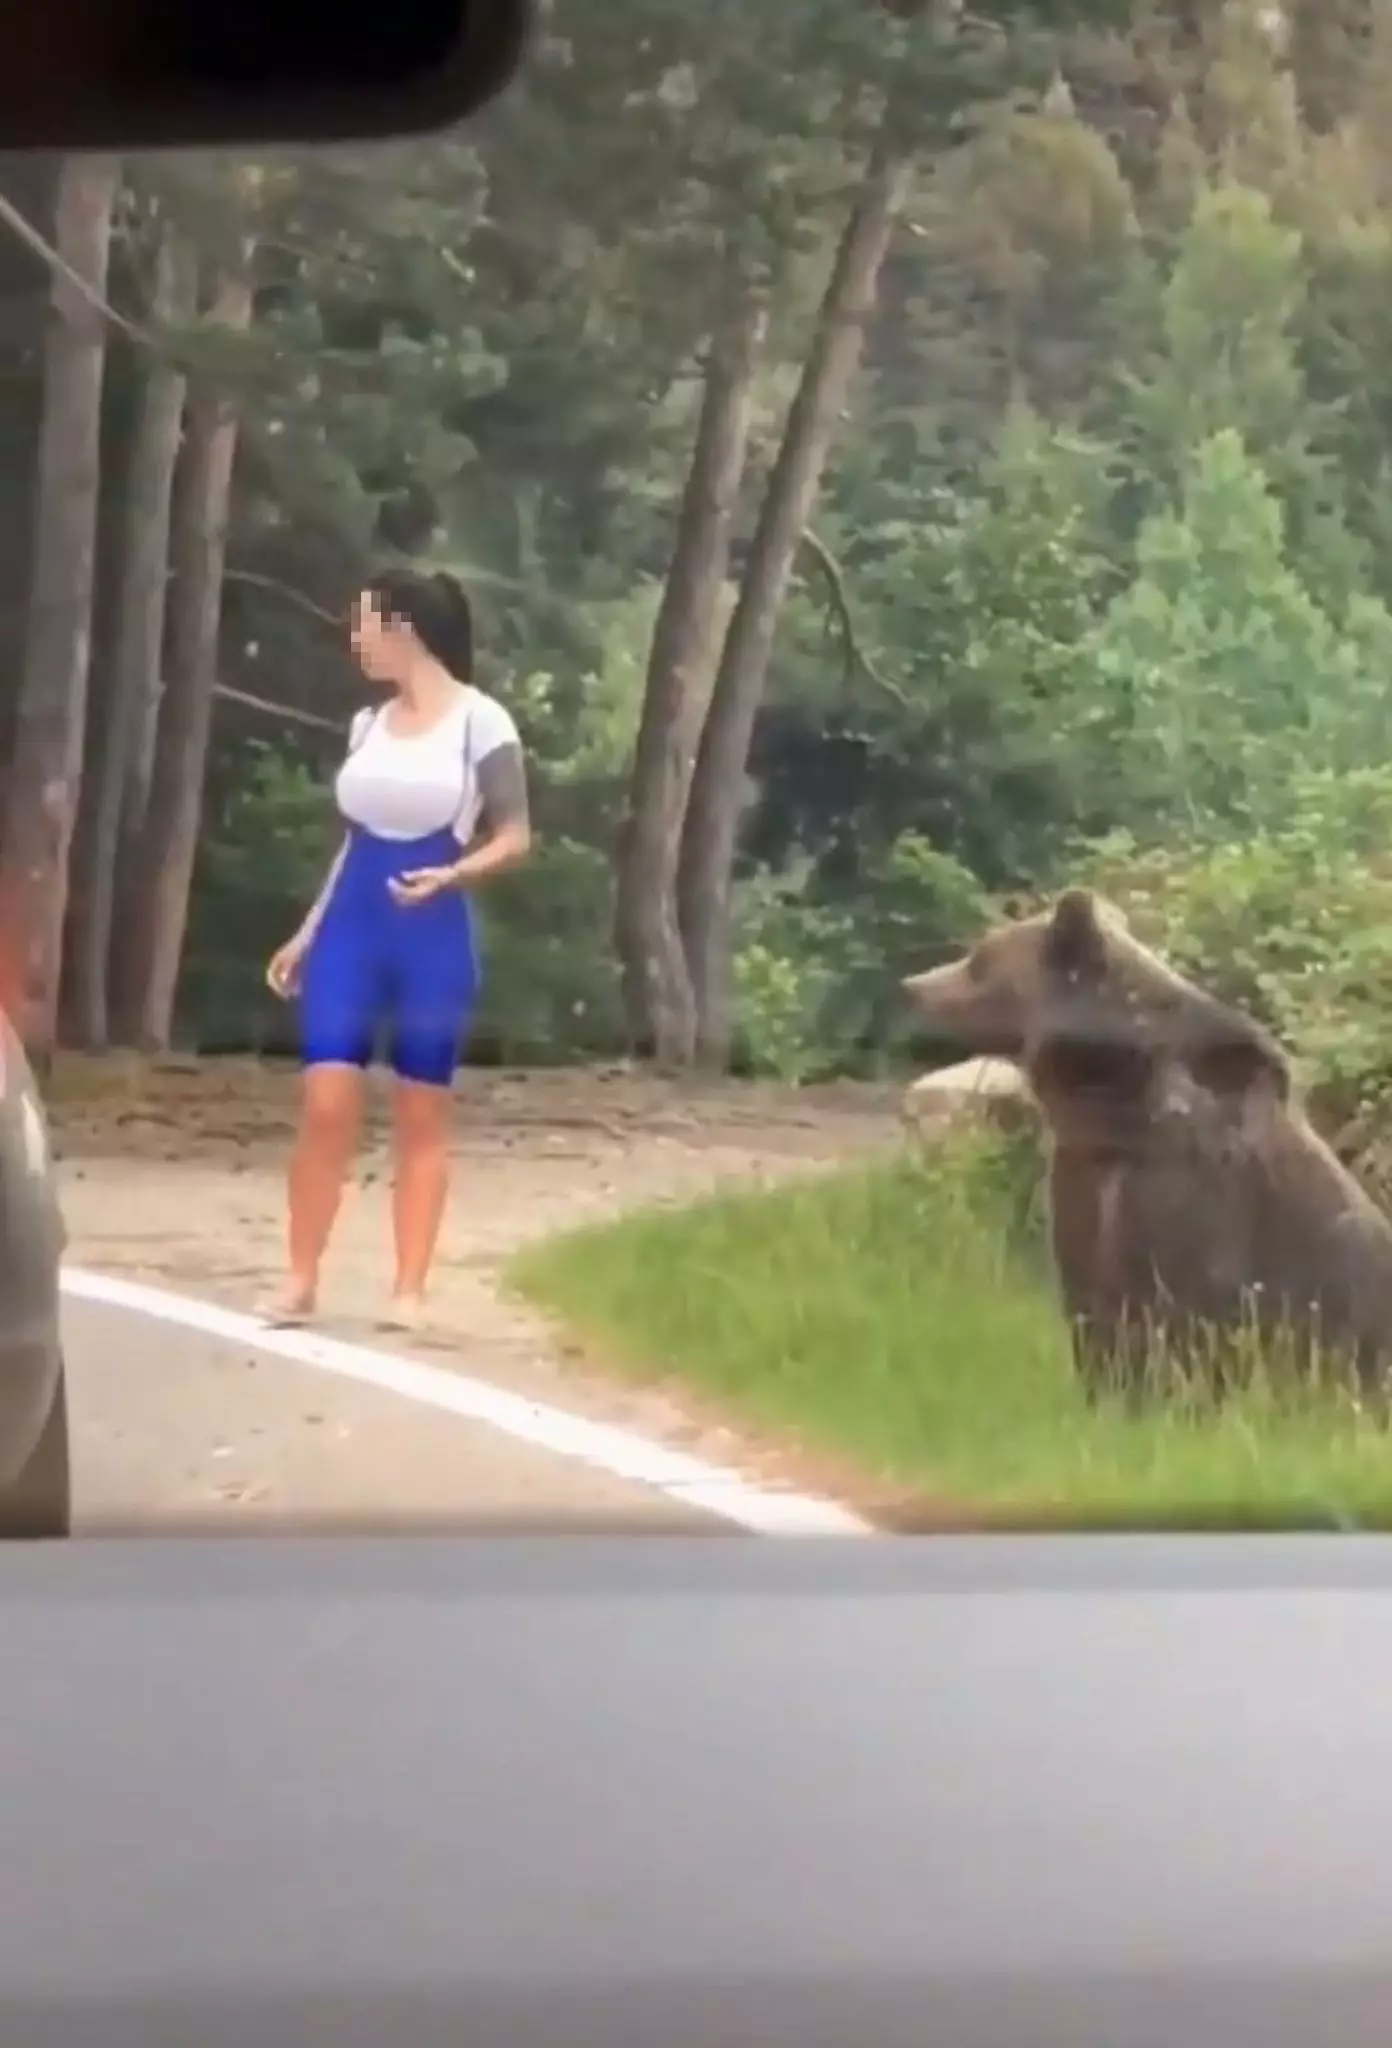 The woman got out of her car and approached the bear.